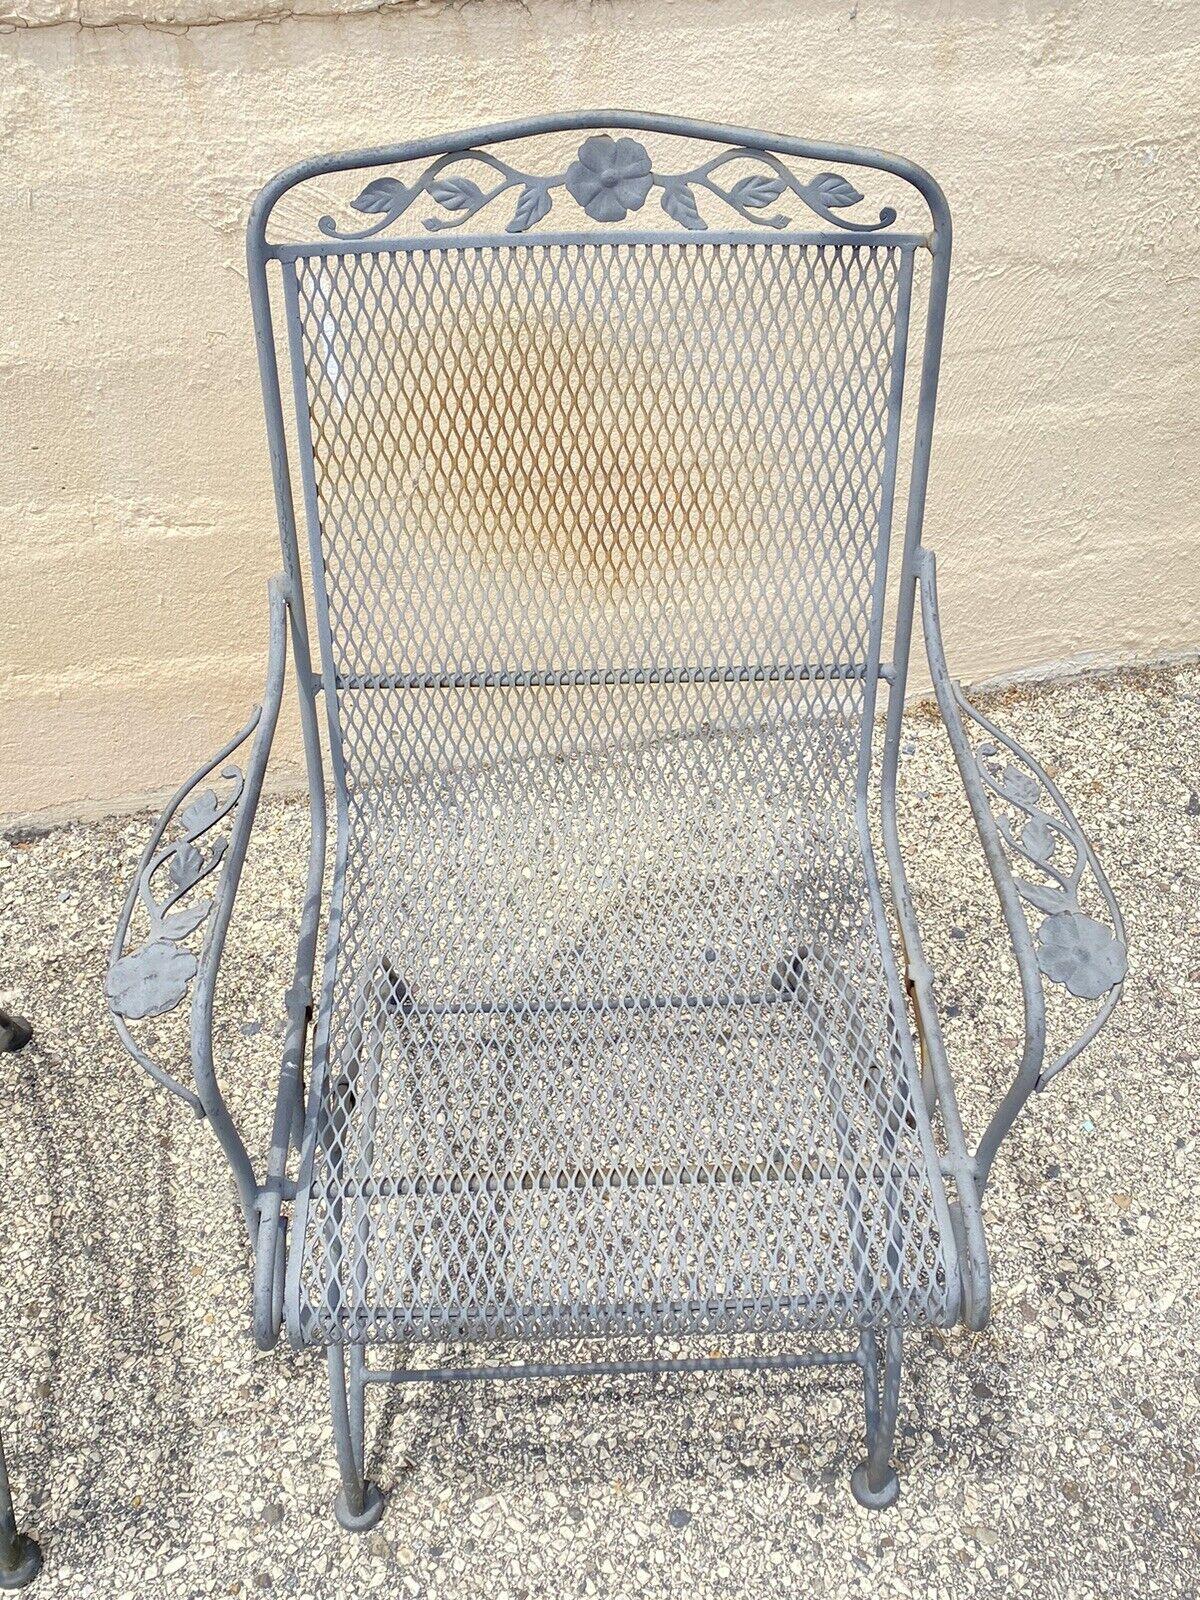 Vintage Meadowcraft Dogwood Coil Spring Wrought Iron Garden Patio Chair, a Pair 1